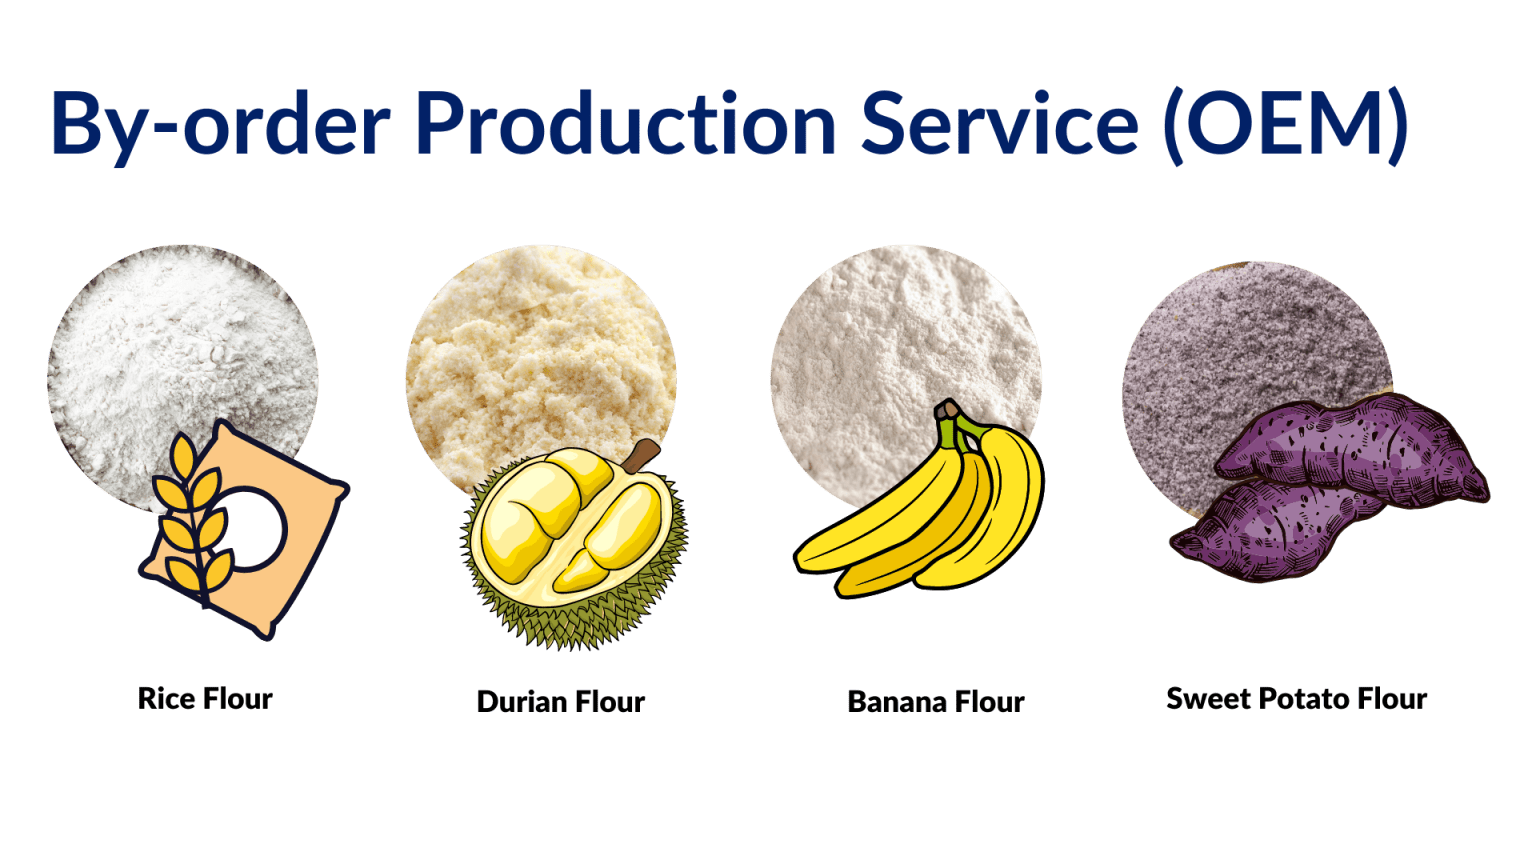 By-order Production Service